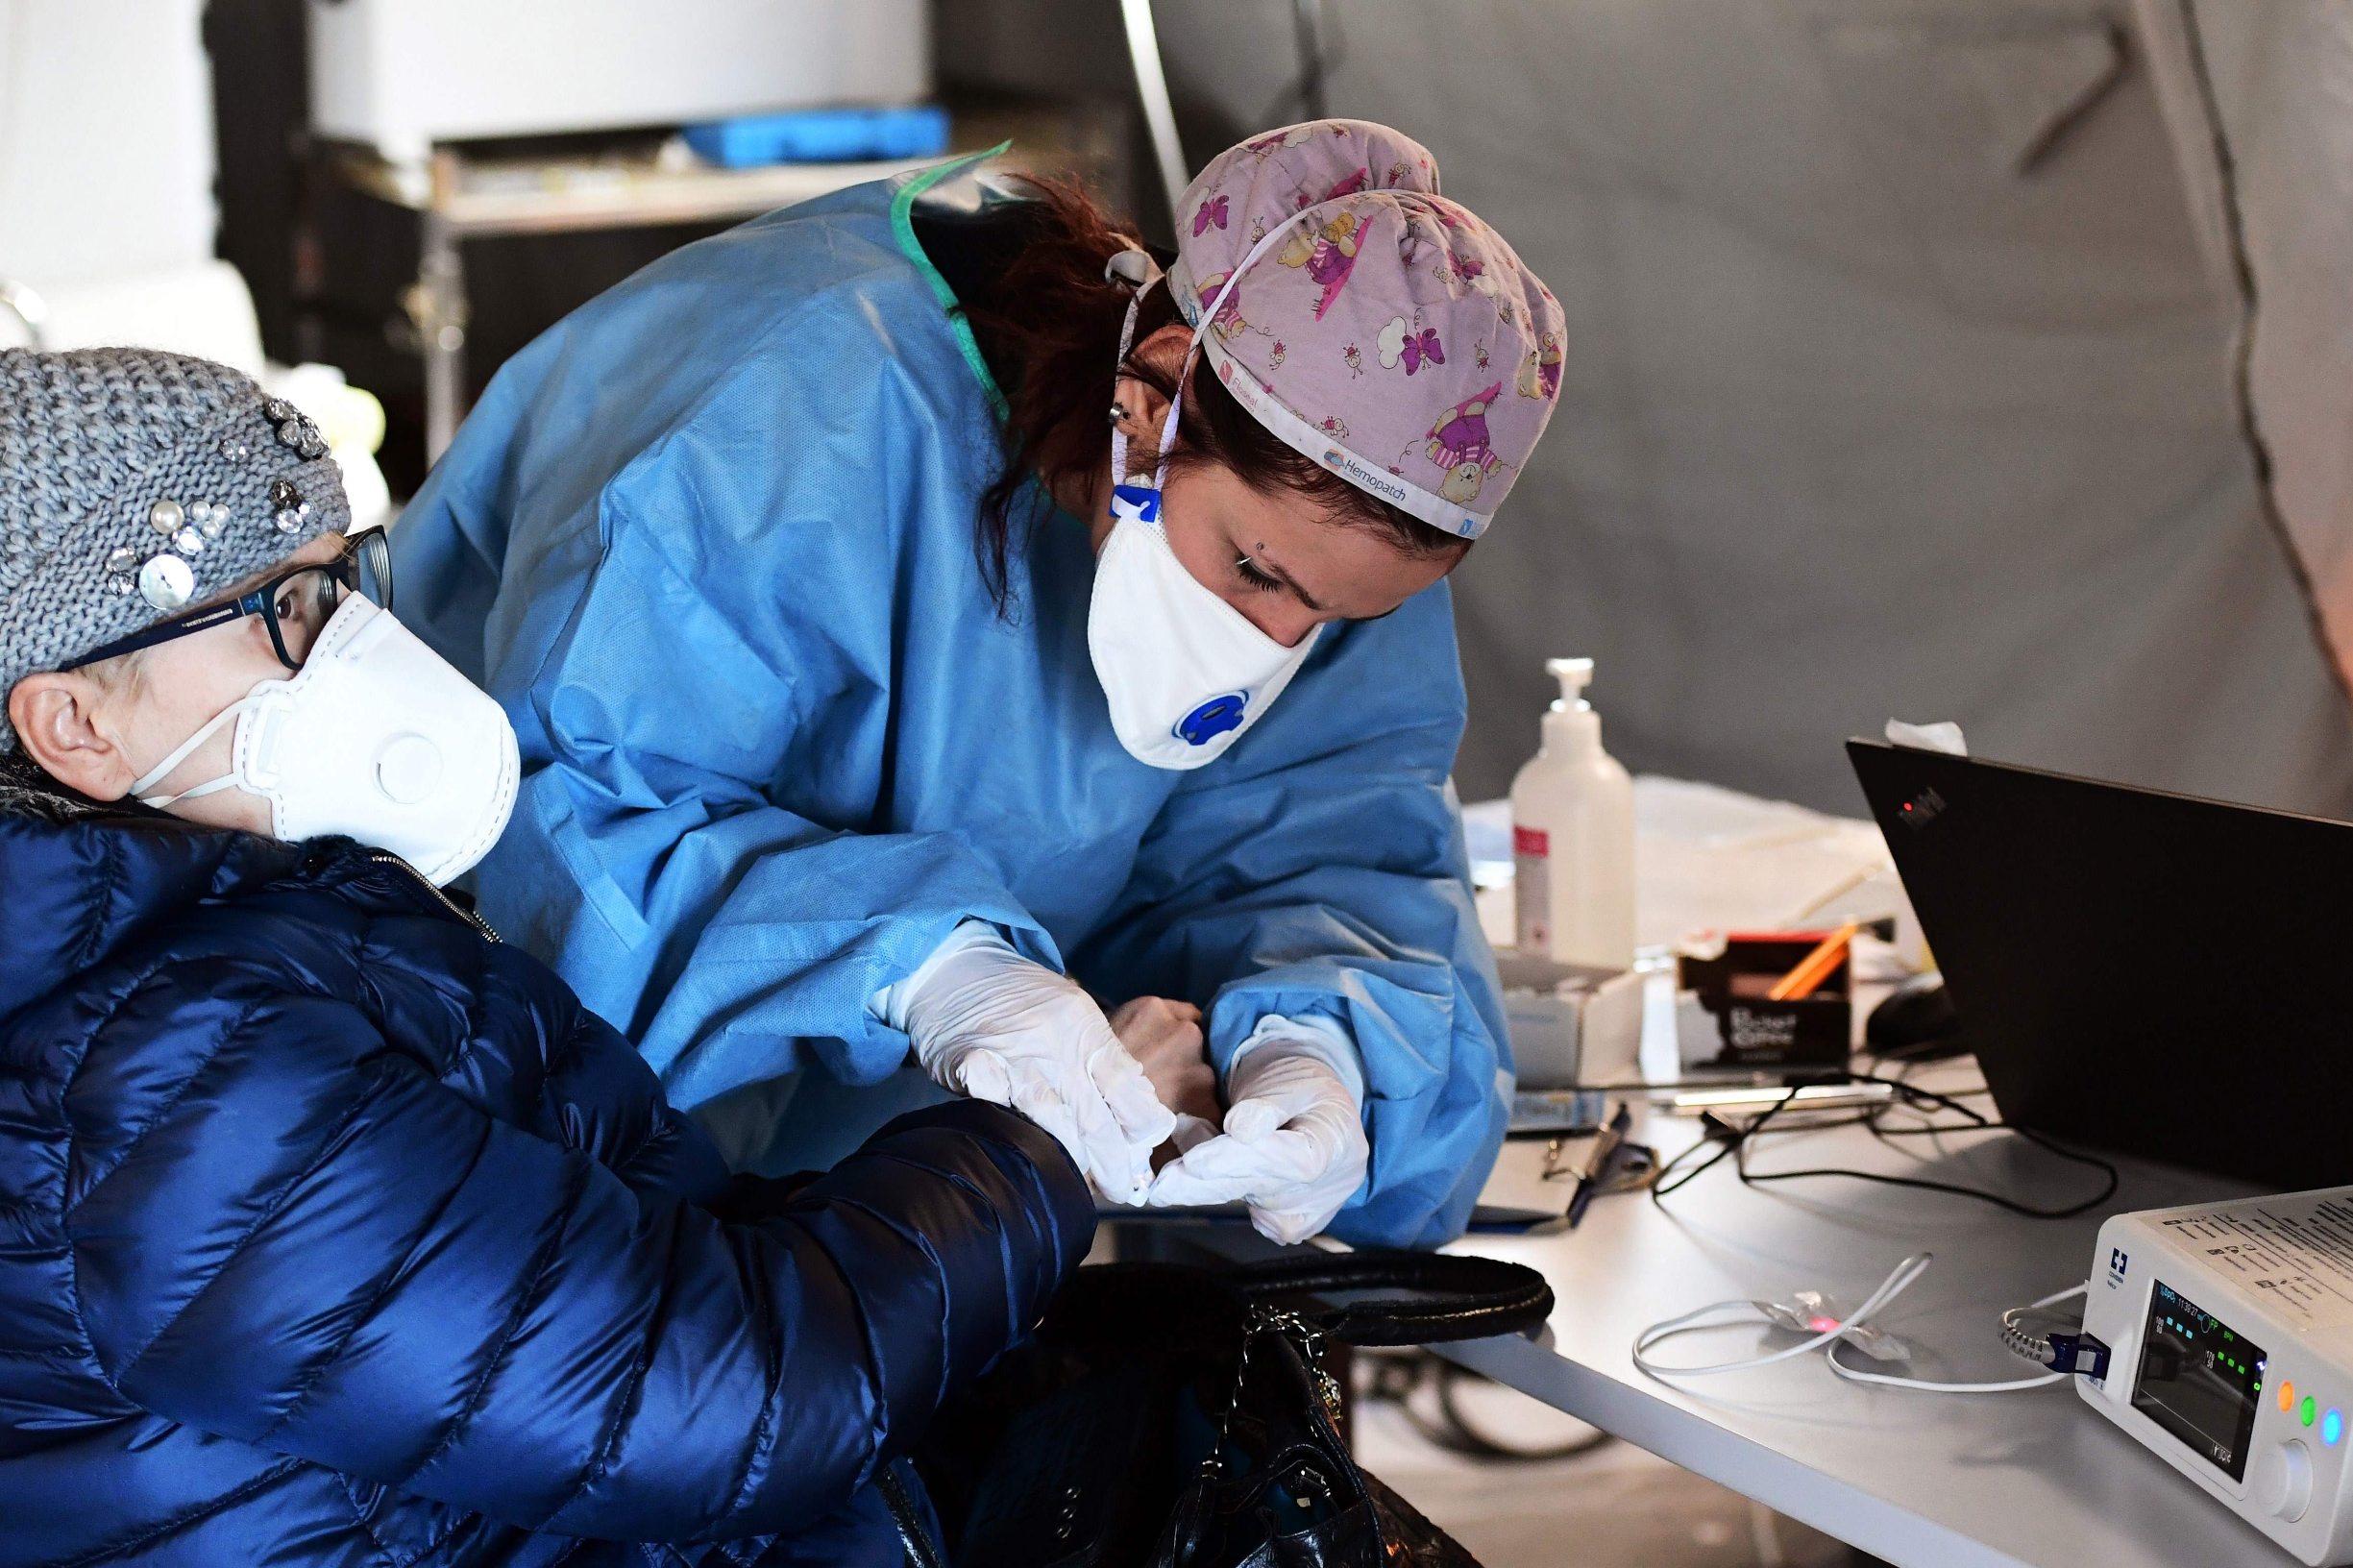 A ederly woman receives assistance in the a pre-triage medical tent in front of the Cremona hospital, in Cremona, northern Italy, on March 4, 2020. - Italy will recommend people stop kissing in public, avoid shaking hands and keep a safe distance from each other to limit the spread of the novel coronavirus. Other measures to be approved by the government, which has borne the brunt of the COVID-19 disease, includes a plan to play all football matches behind closed doors. (Photo by Miguel MEDINA / AFP)